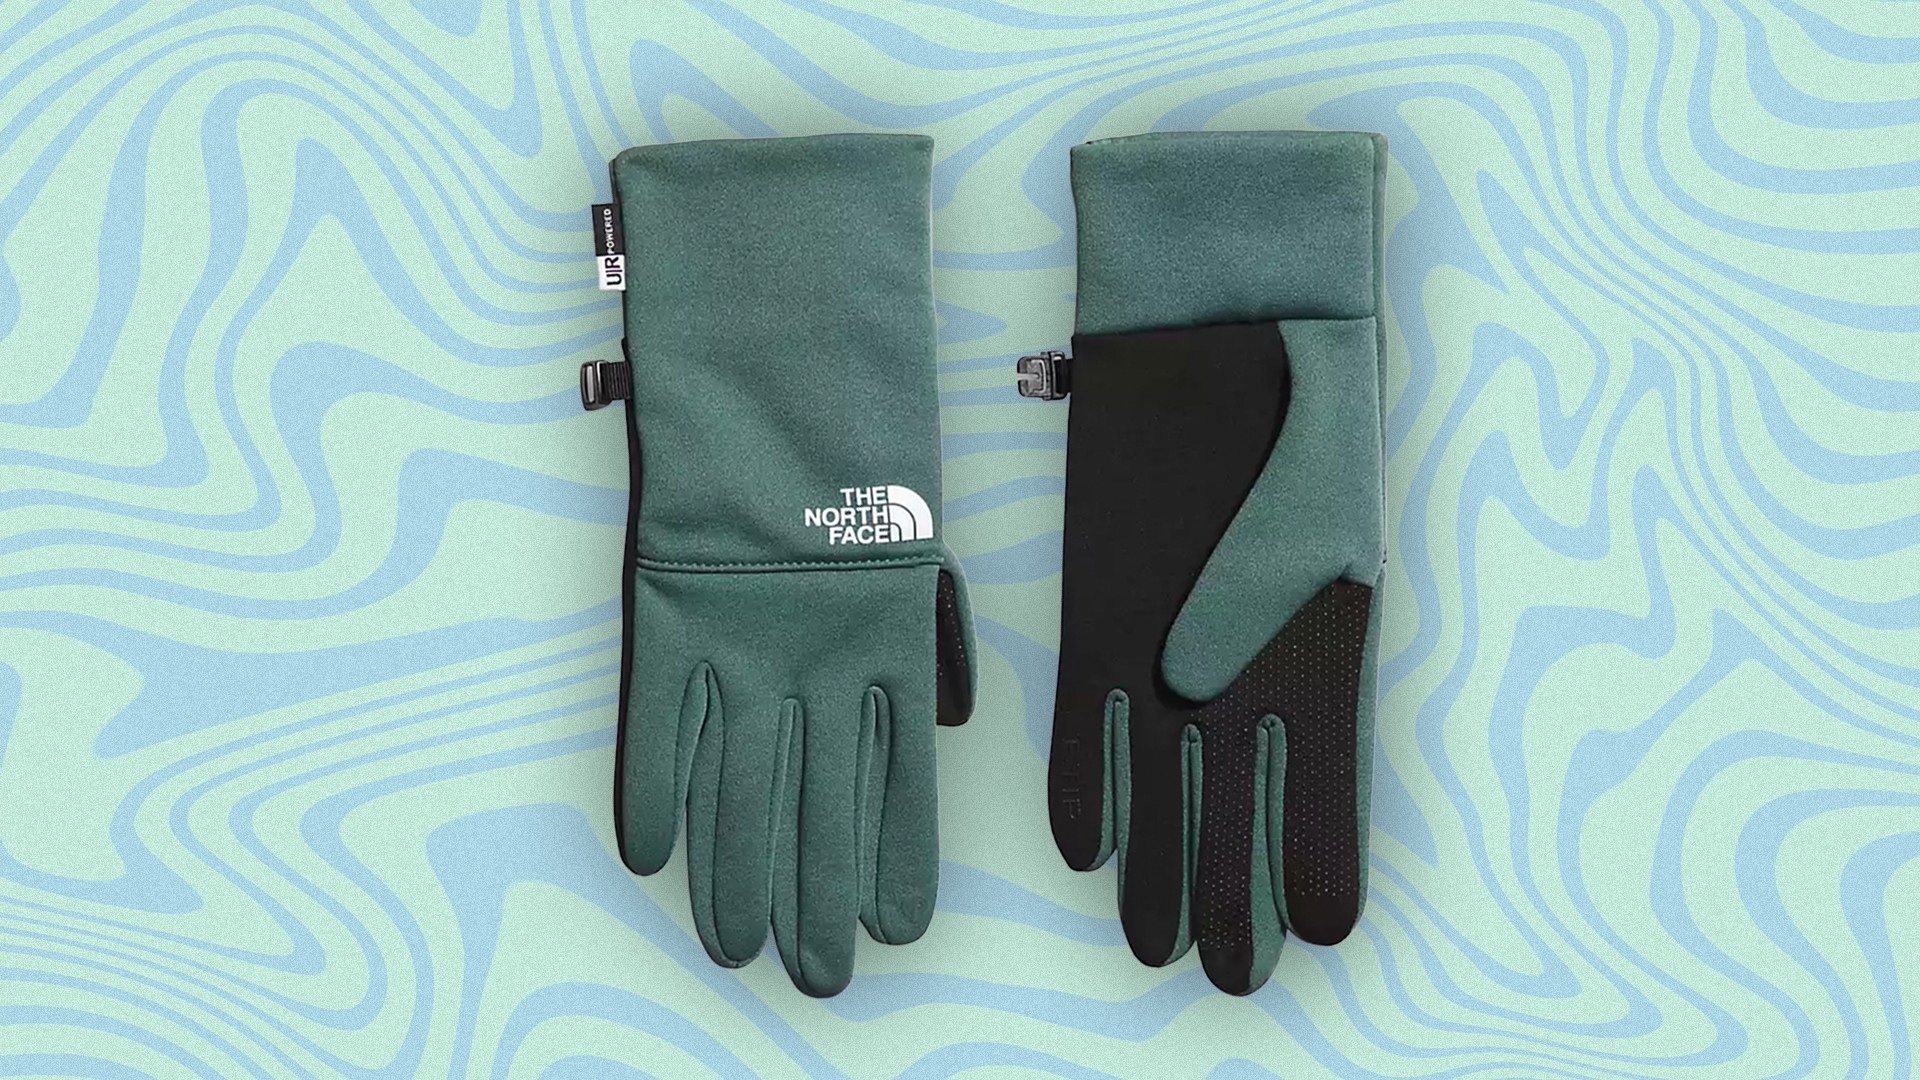 Review: The North Face's Etip Gloves Make Texting In Cold Weather Easy